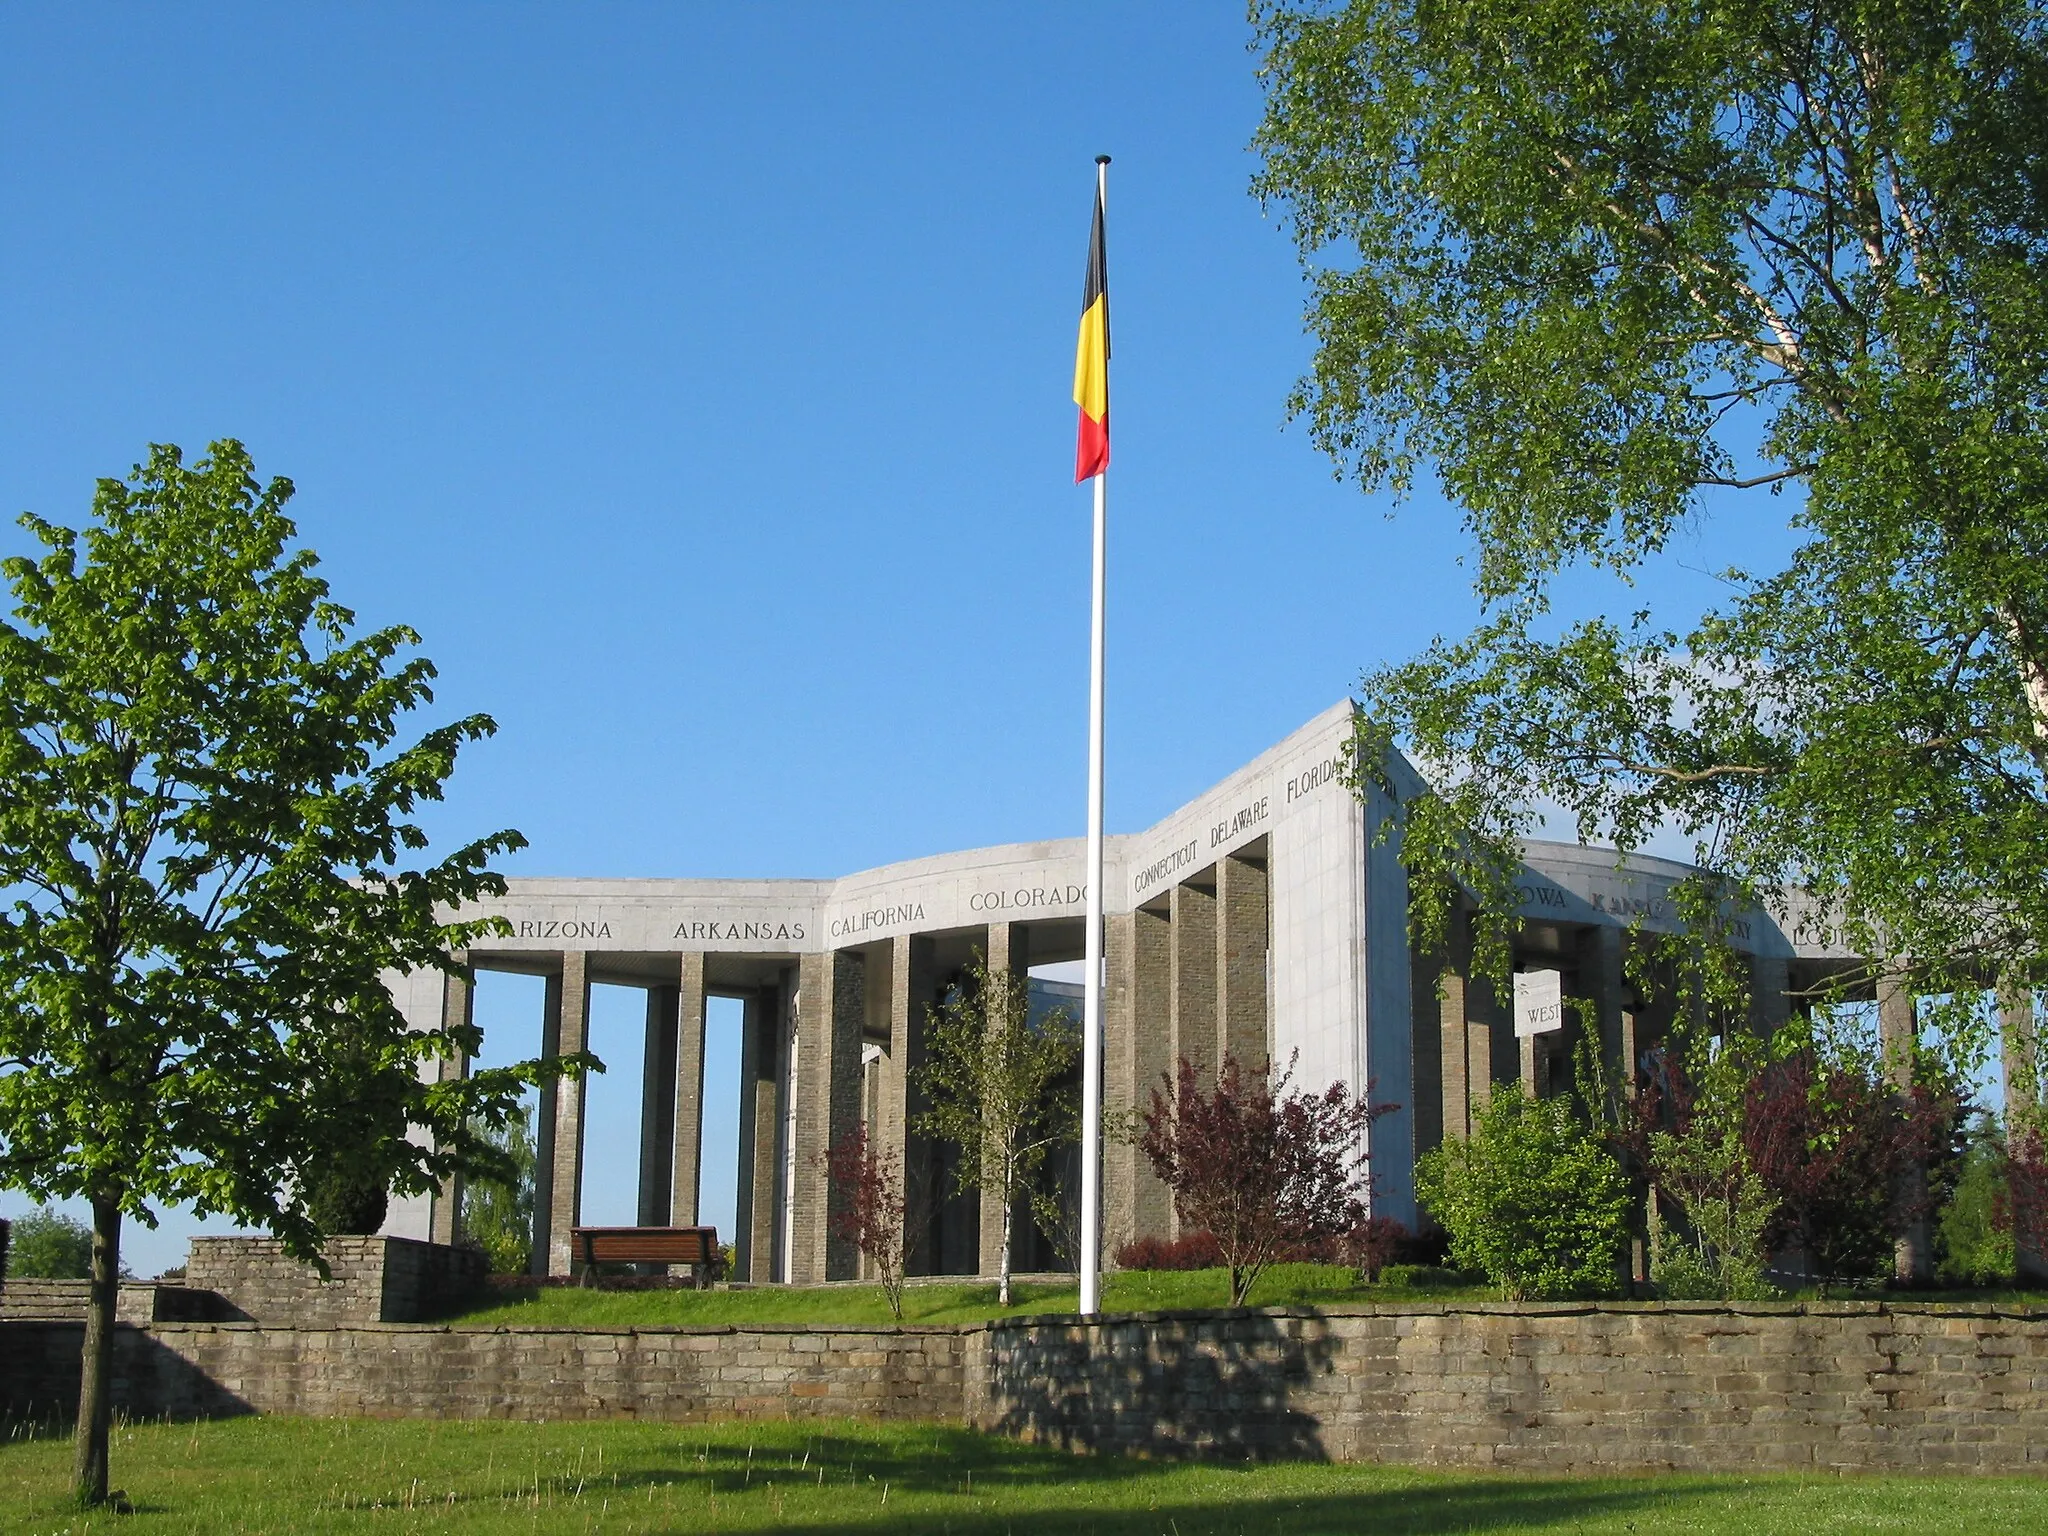 Image de Prov. Luxembourg (BE)